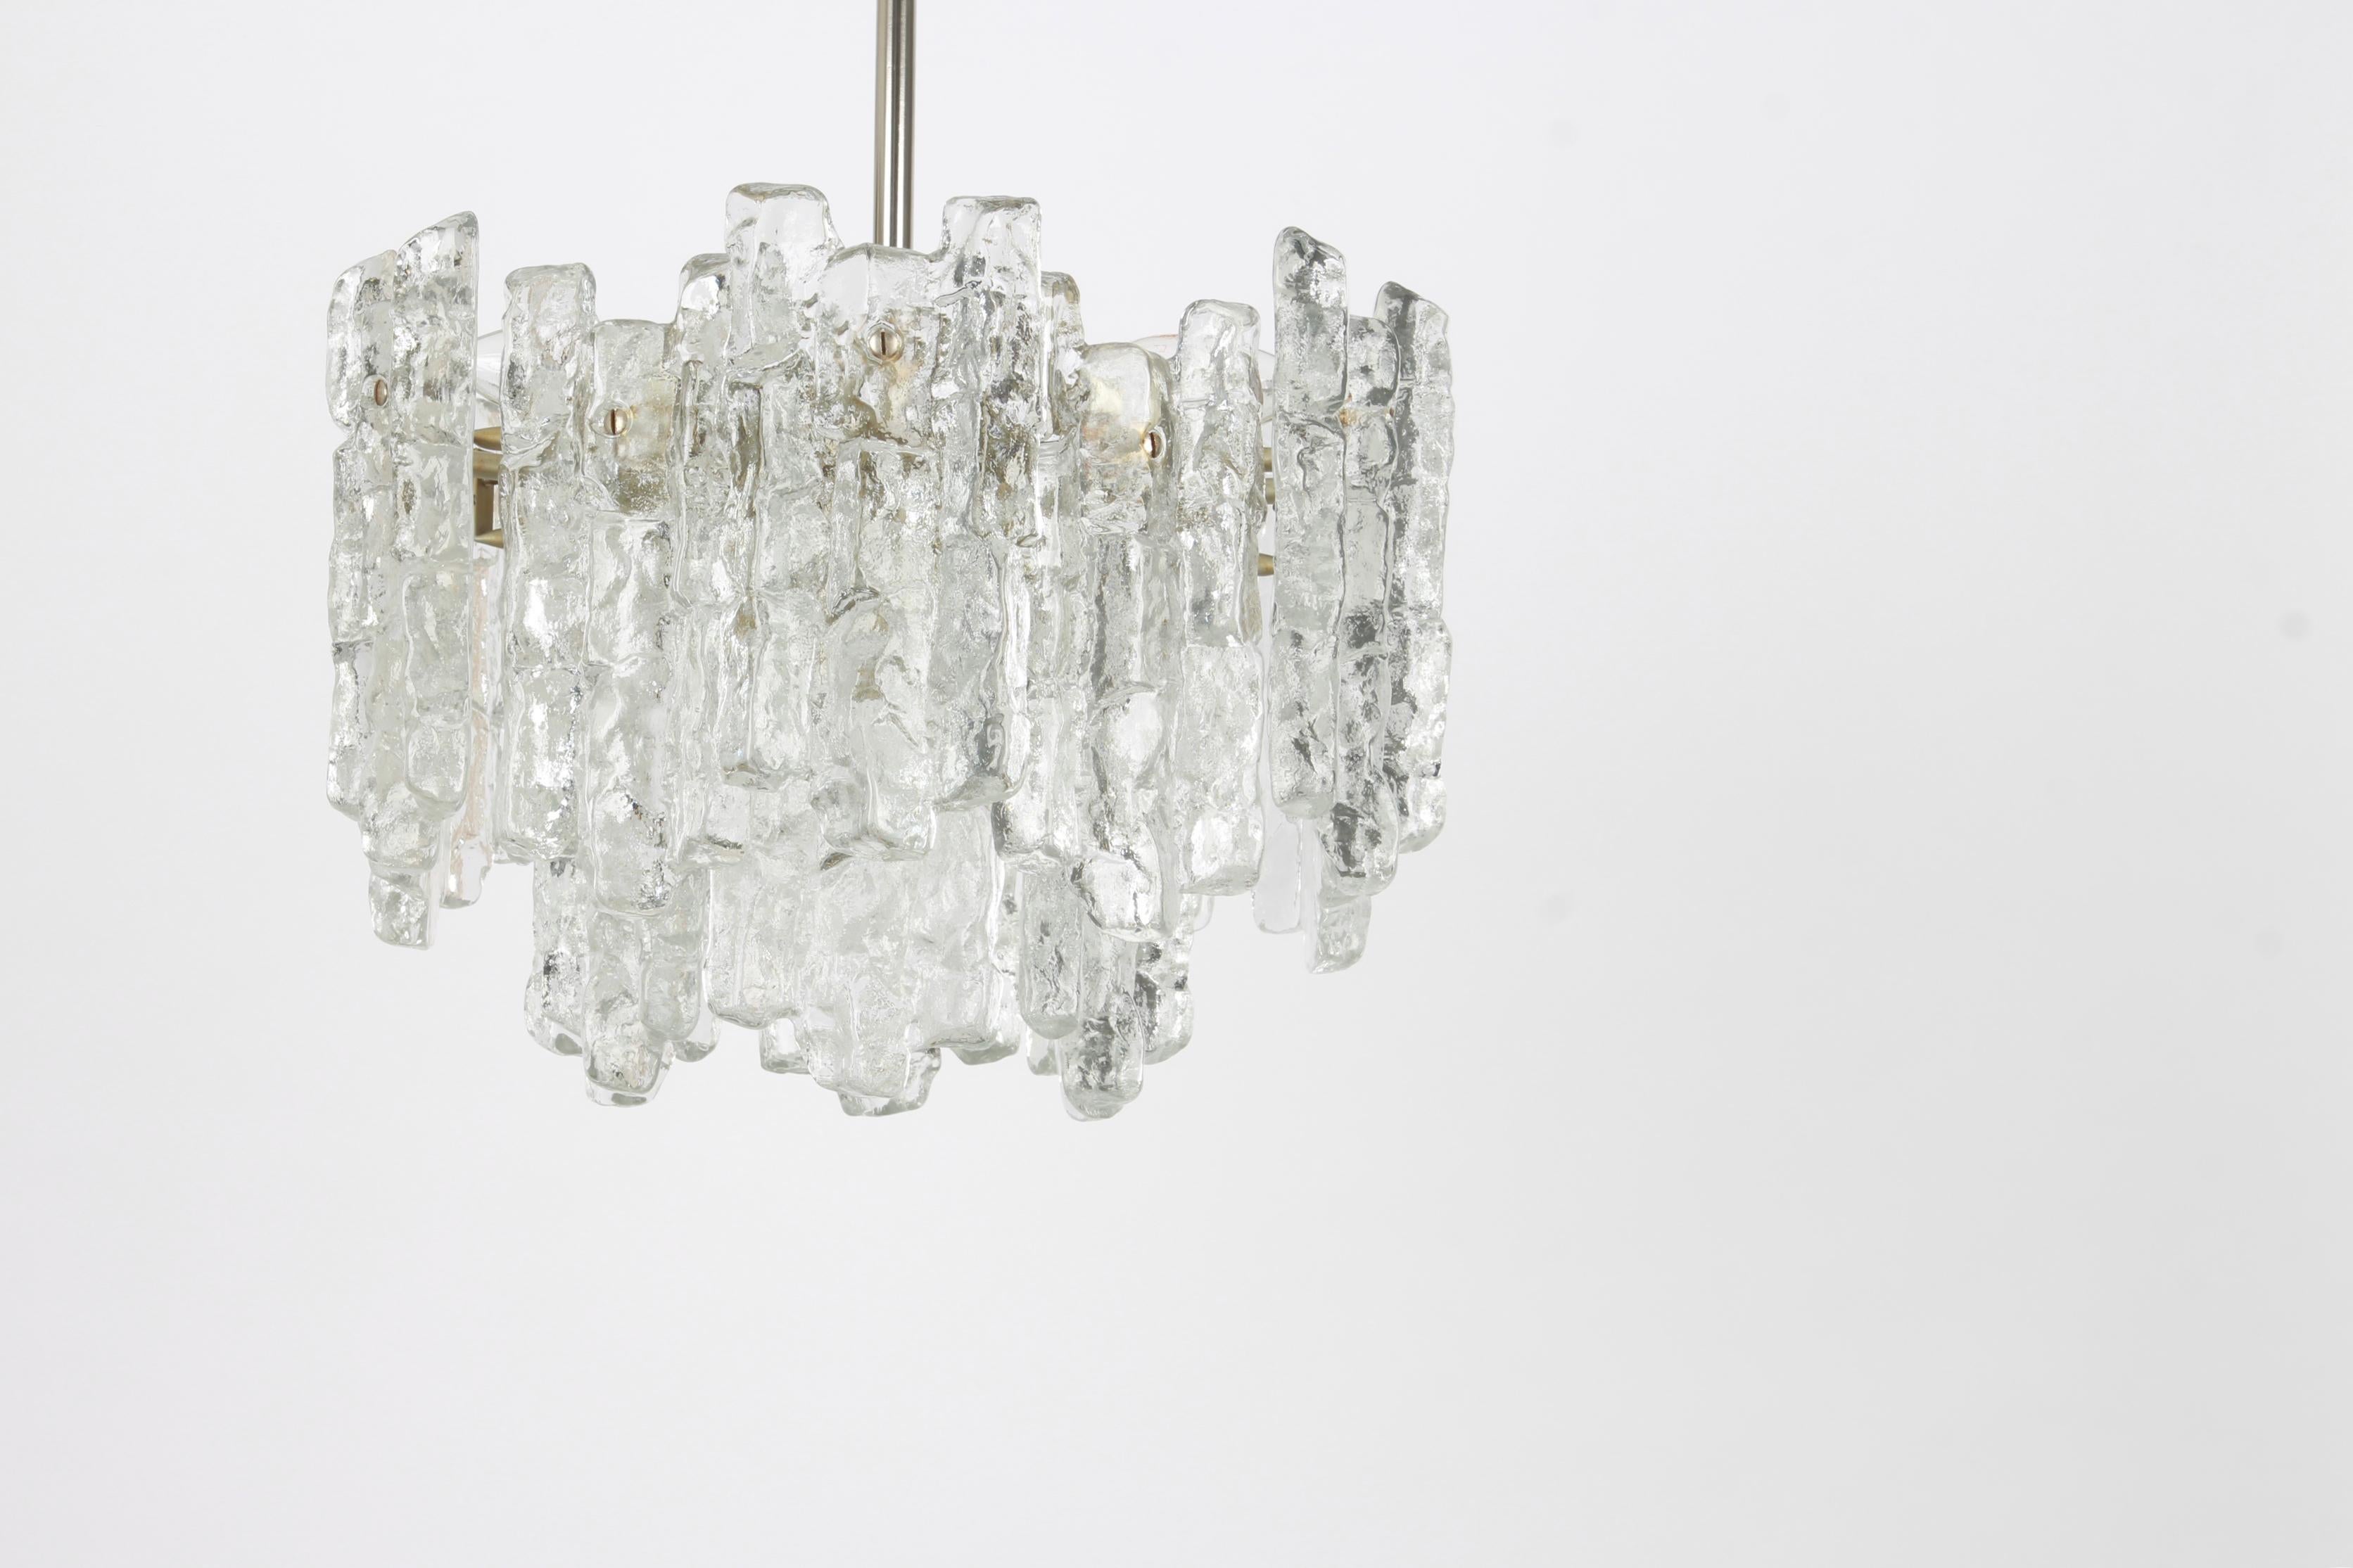 1 of 5 Large Murano Ice Glass Chandelier by Kalmar, Austria, 1960s For Sale 2